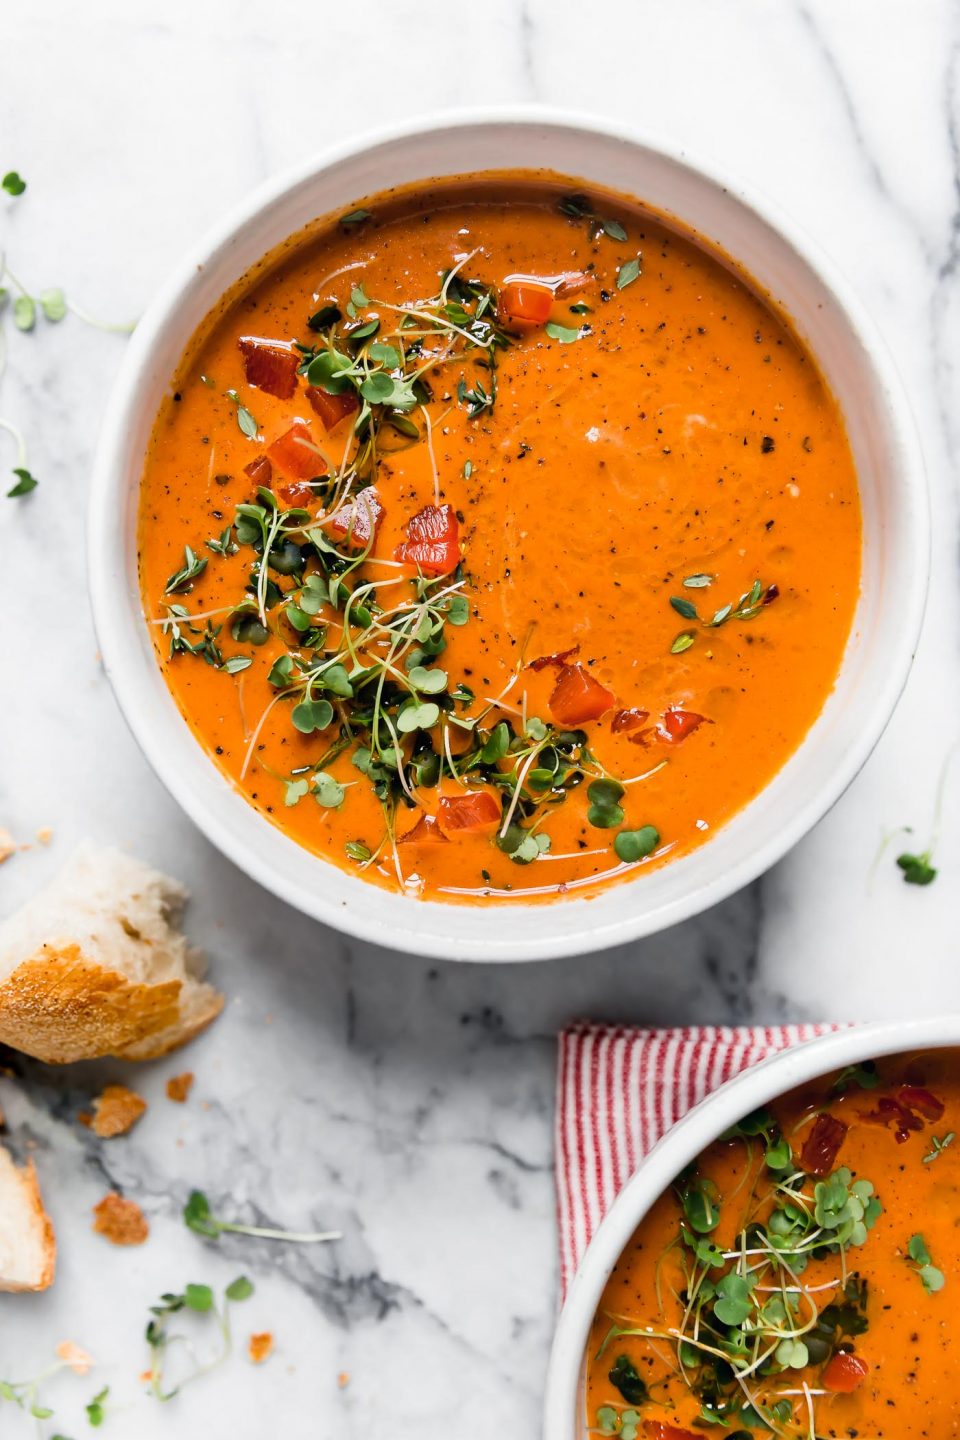 Creamy Roasted Red Pepper soup in a white ceramic bowl, topped with microgreens and cracked black pepper. The bowl is surrounded by some pieces of crusty bread, and a second bowl of soup sitting on a striped red linen napkin. Everything is placed on a white marble surface.